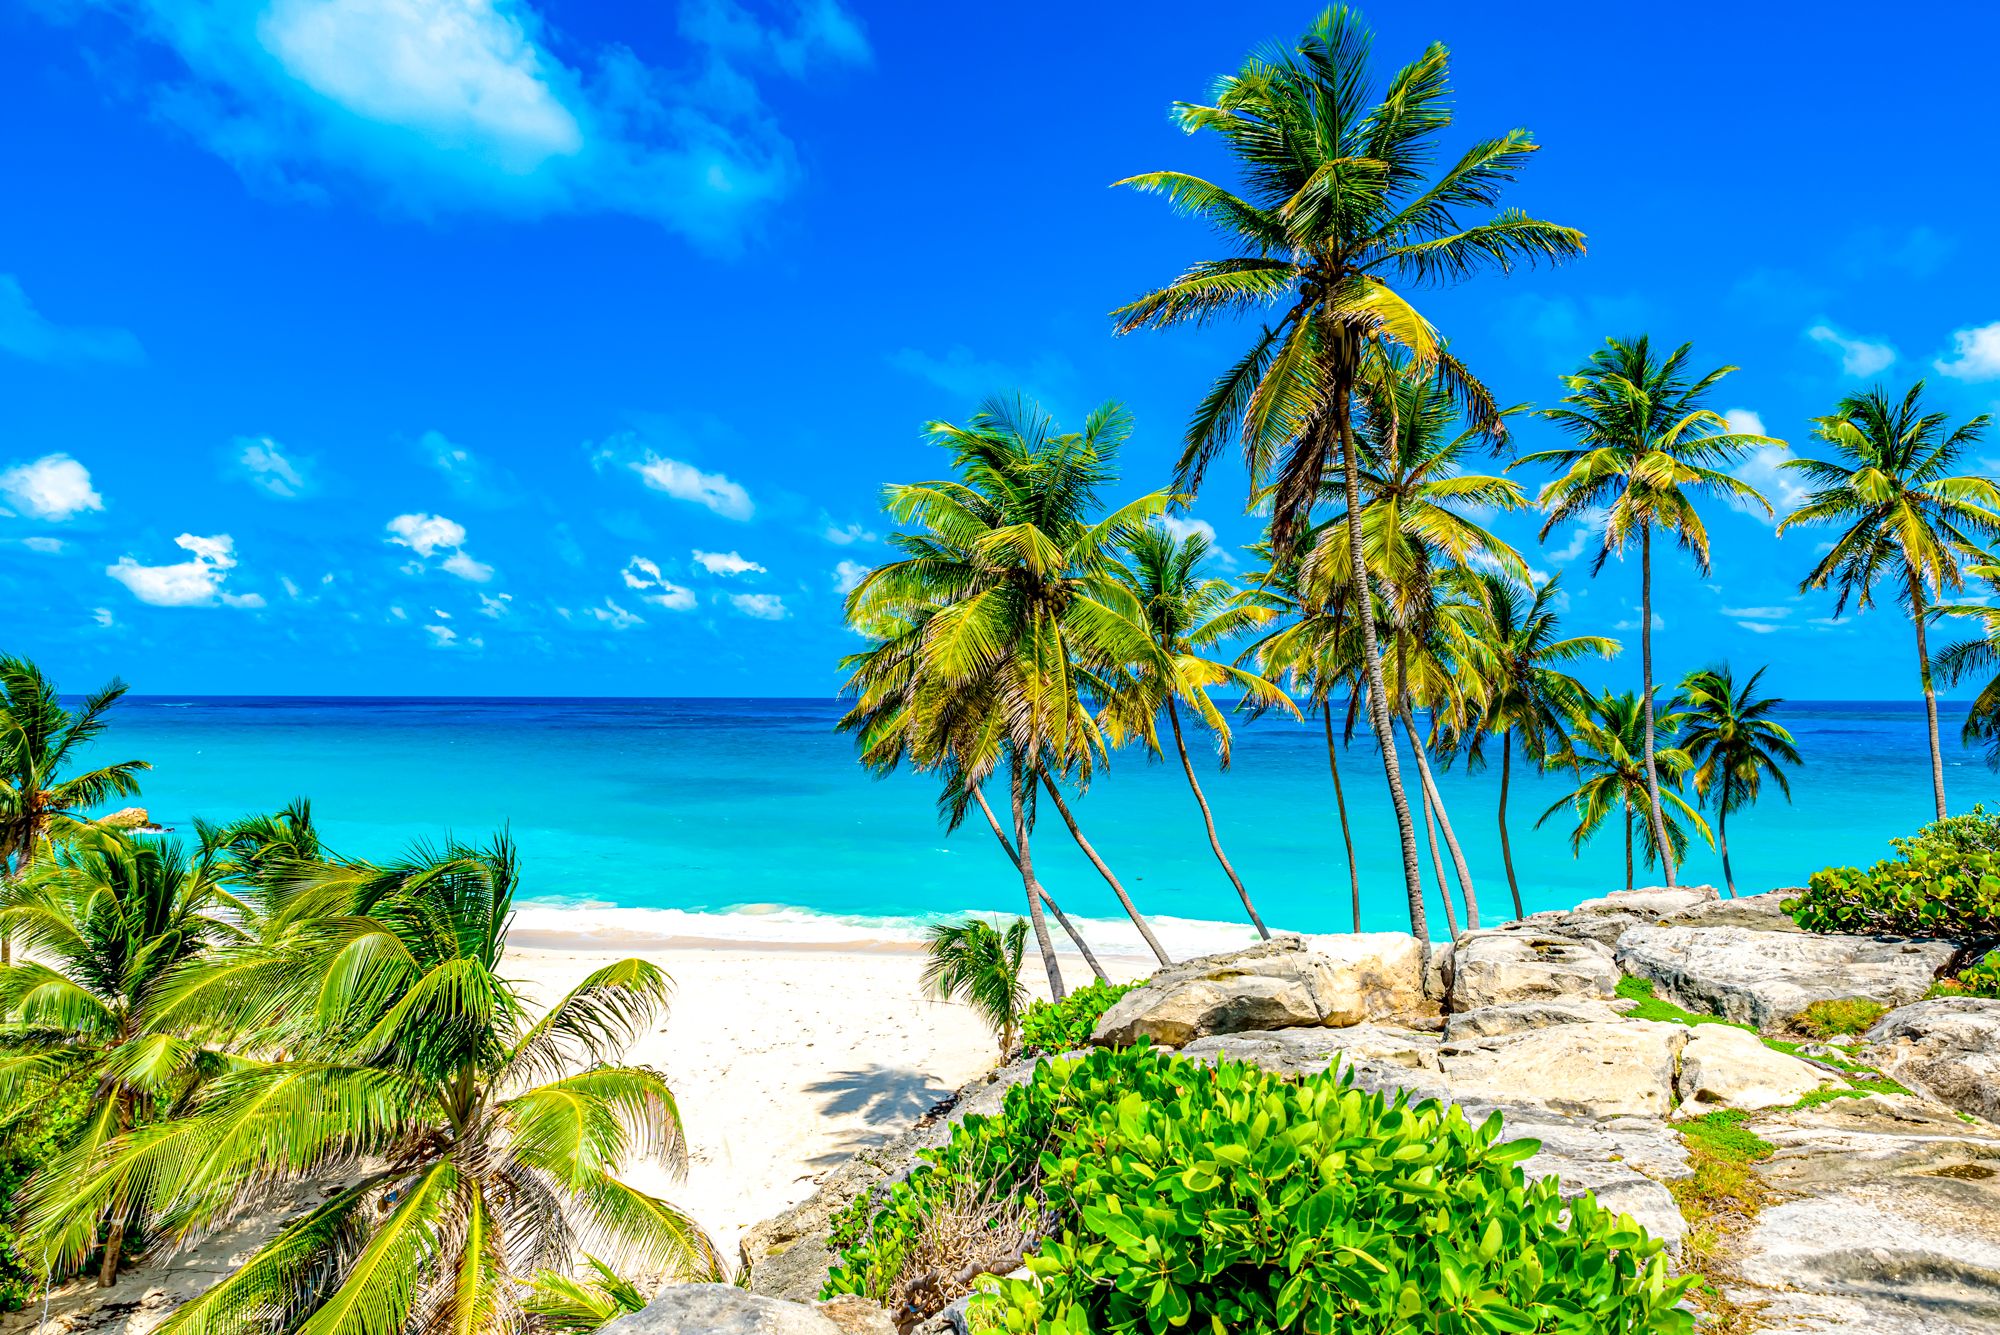 38 Pictures of Barbados You'll Fall in Love with | SANDALS